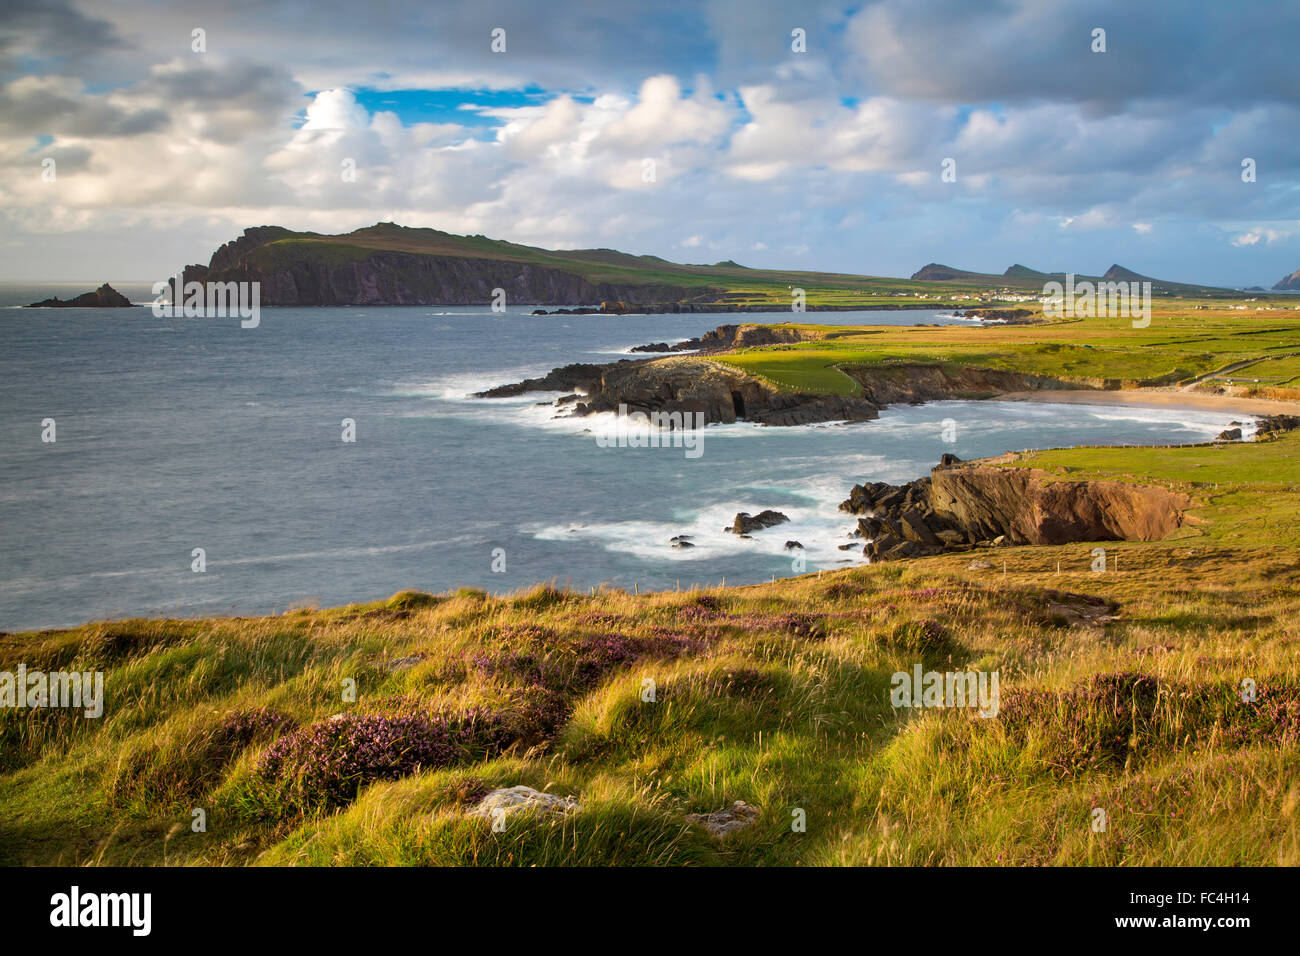 Evening sunlight over Ballyferriter Bay, Sybil Point and the peaks of the Three Sisters, Dingle Peninsula, County Kerry, Ireland Stock Photo